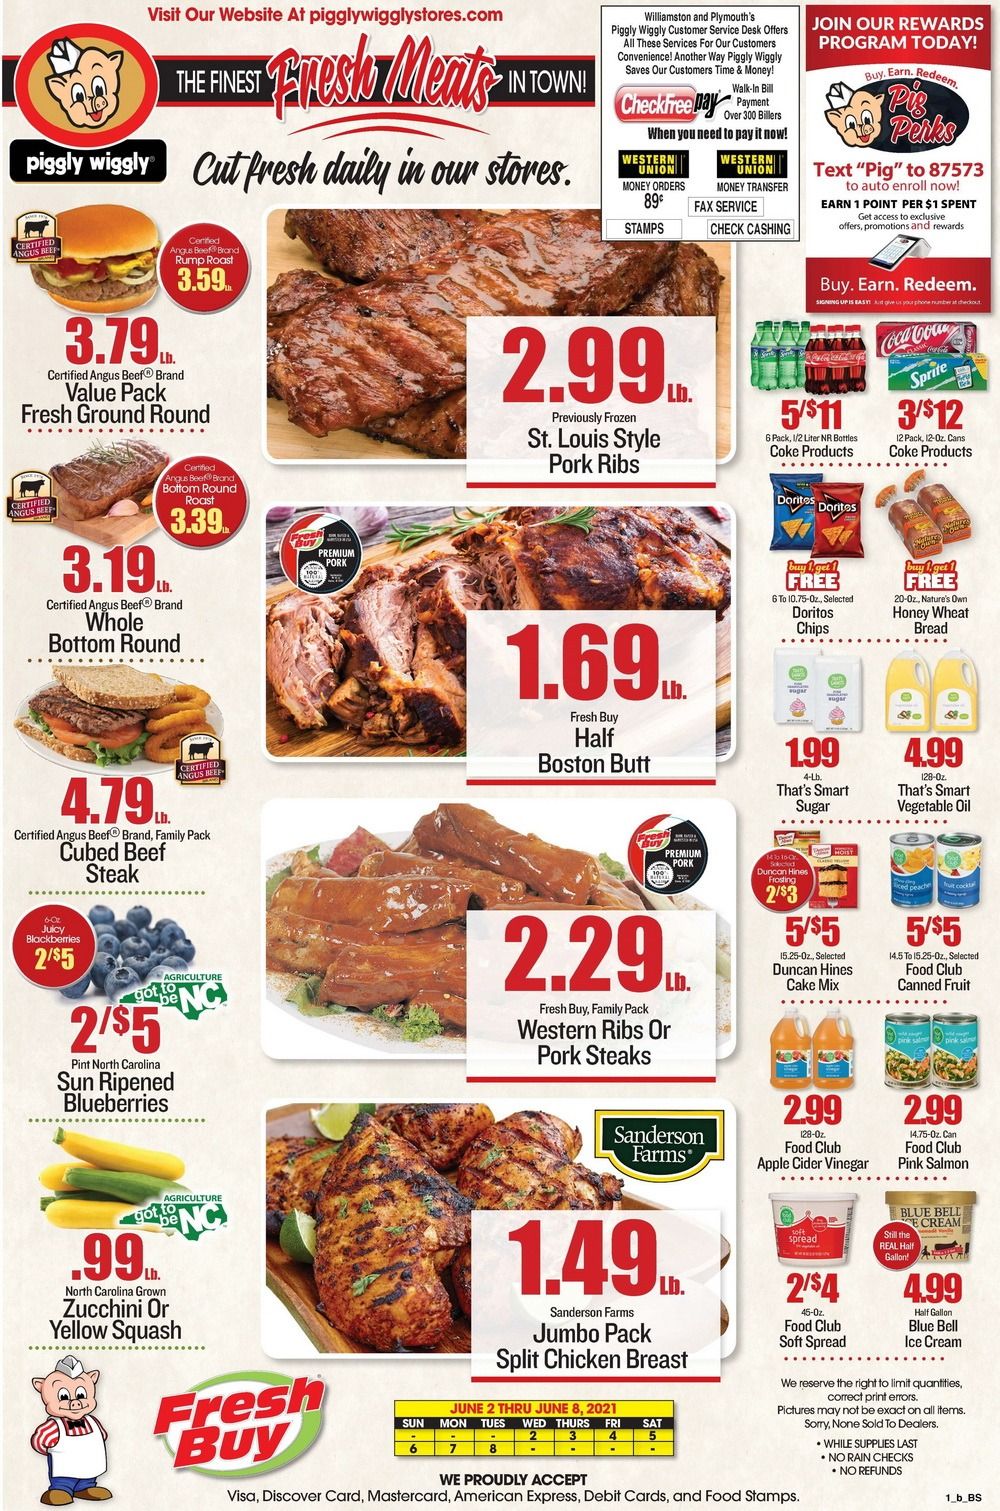 Piggly Wiggly Weekly Ad June 02- June 08, 2021